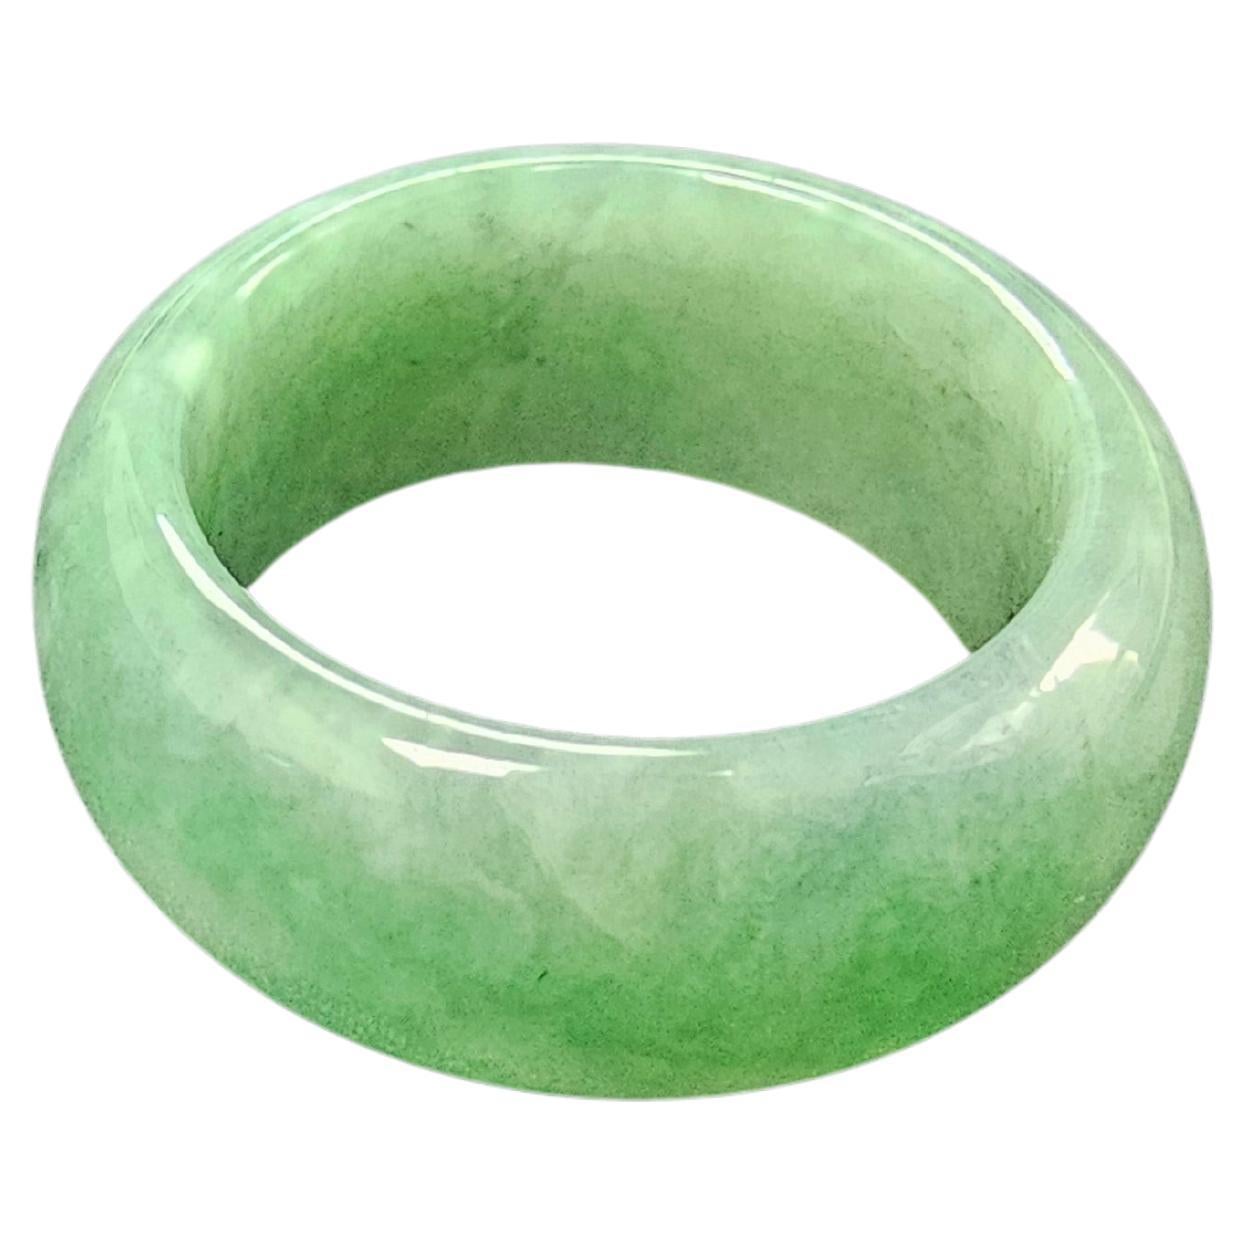 Certified Green Burmese solid A-Jadeite Infinity Band Cocktail Ring for men and women (unisex). Untreated, and 100% Natural,

Our finest and most translucent series of Burmese A-Jadeite Infinity Band Rings. Our handpicked exclusive Jadeite is